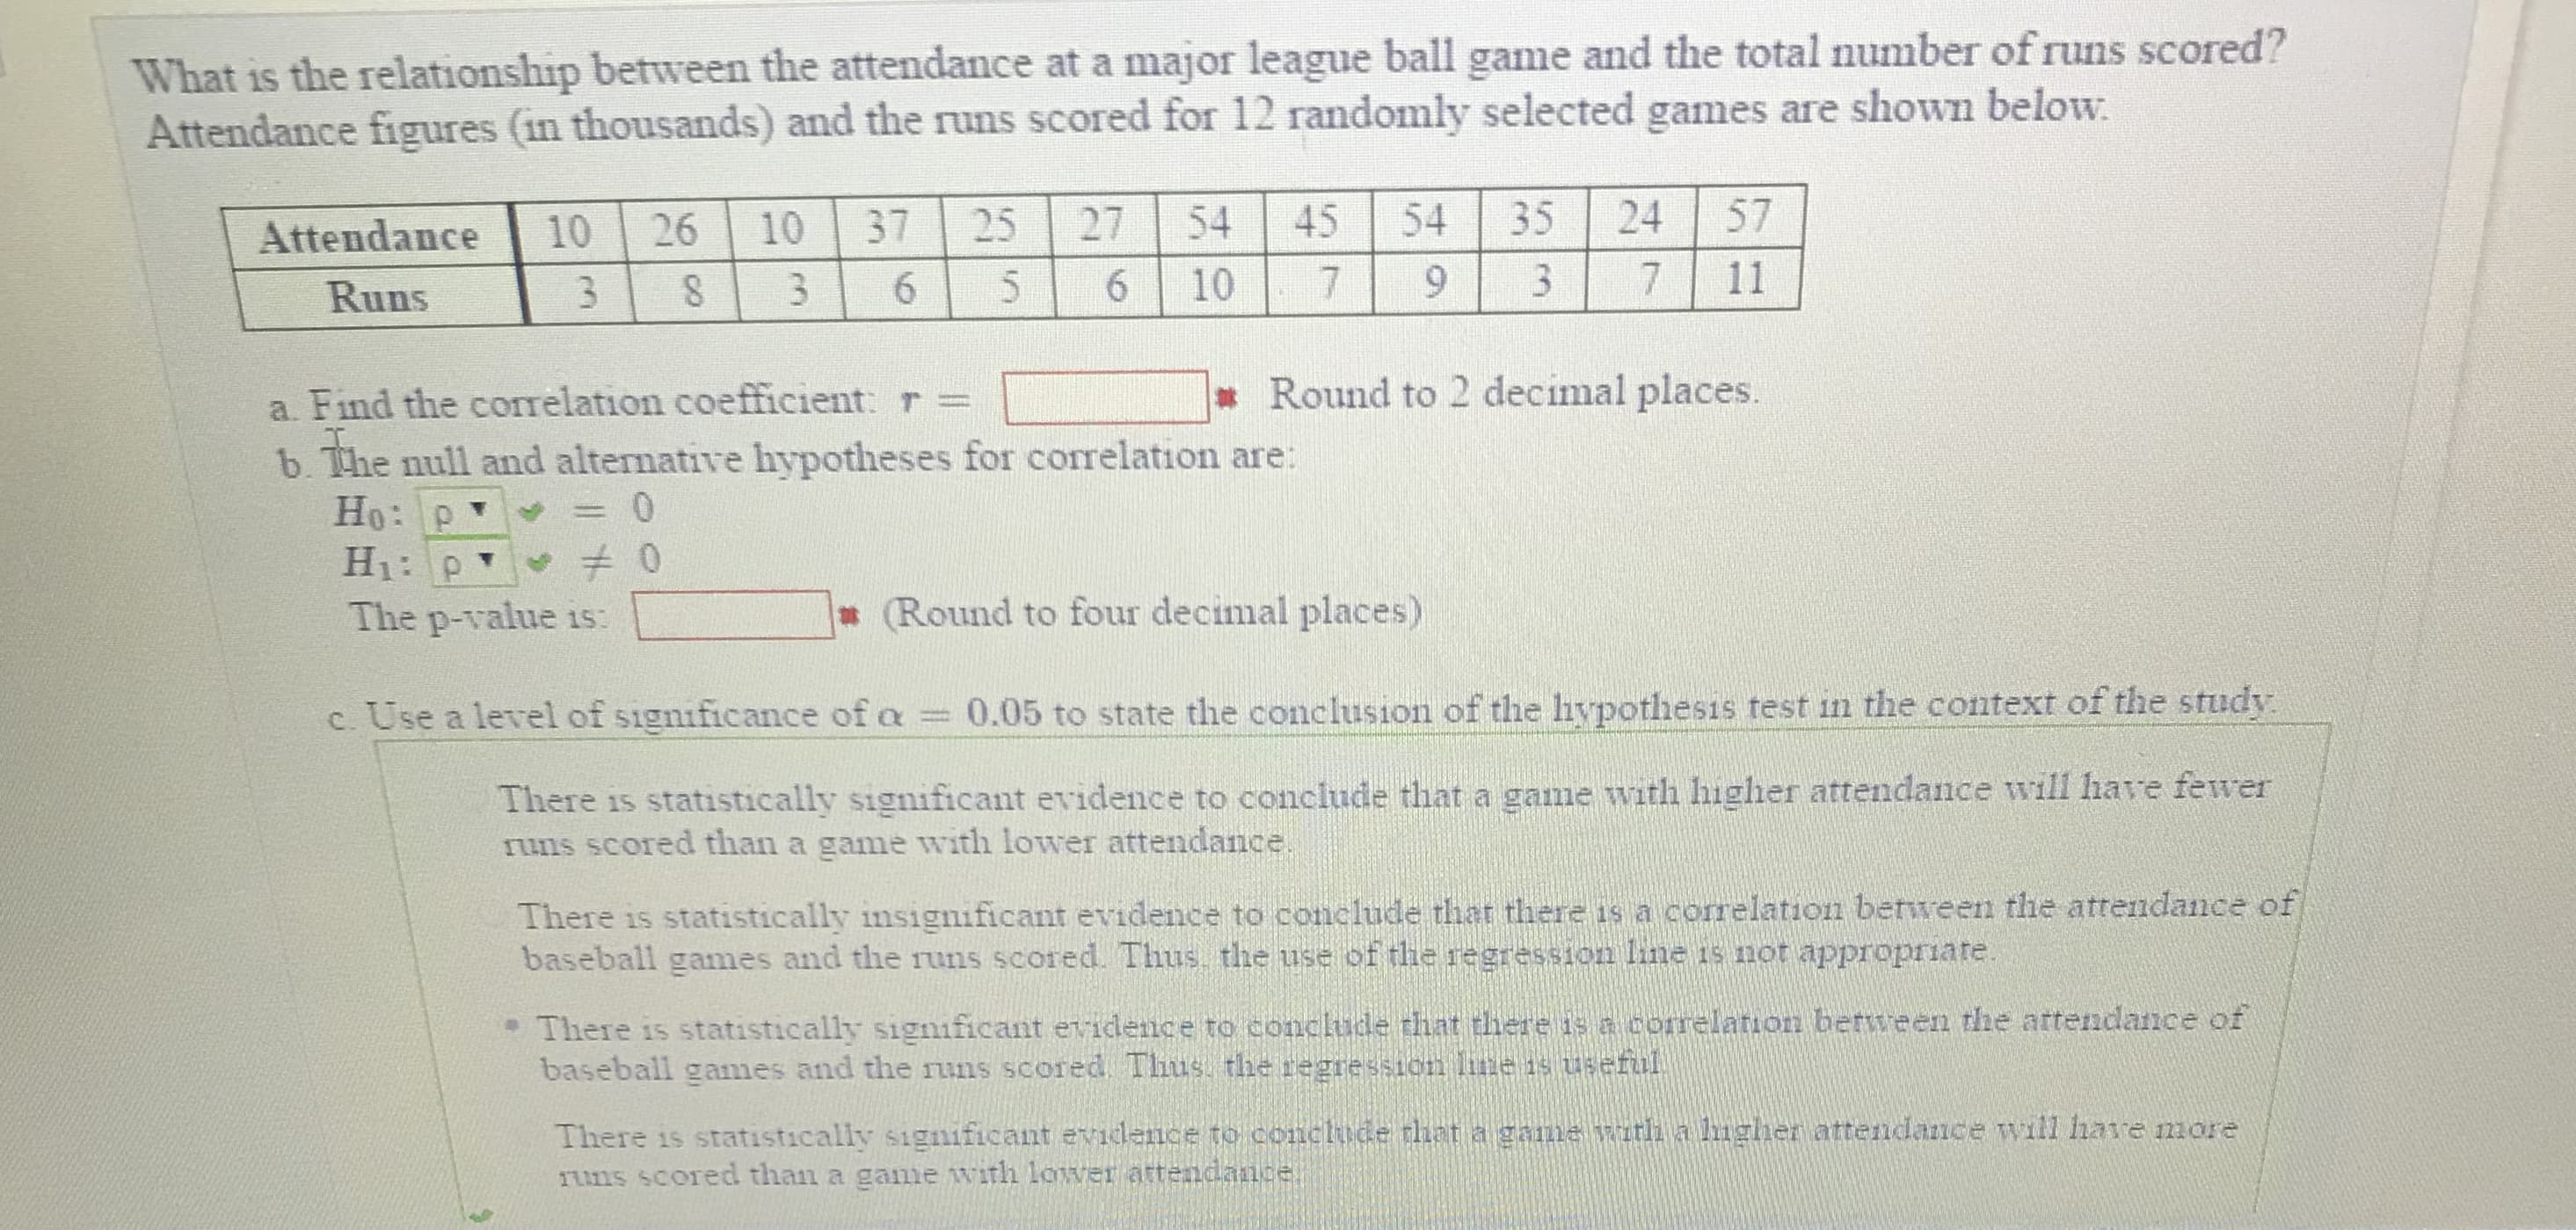 What is the relationship between the attendance at a major league ball game and the total number of runs scored?
Attendance figures (in thousands) and the runs scored for 12 randomly selected games are shown below:
Atte dance 110126110 37125127154 45 541351 24 157
Kuns
Round to 2 decimal places.
a. Find the correlation coefficient r =
b the null and alternative hypotheses for correlation are:
(Round to four decimal places)
The p-value is:
c Use a level of signficance of a 0.05 to state the conclusion of the hypothesis test in the context of the study
There is statistically significant evidence to conclude that a game with higher attendance will have fewer
runs scored than a game with lower attendance
There is statistically insignificant evidence to conclude that there is a correlation benıreen the attendance of
baseball games and the runs scored. Thus the use of the regression line is not appropriate
·T1ere is statistically significant er i ence to conclude that there is correlation between the attendance of
baseball games and the runs scored Thus. the regression liwets useful
There is statistically significant evidence to conclude that a game wutlh a lugher attendance will hare more
runs scored than a game with Lower attendance
